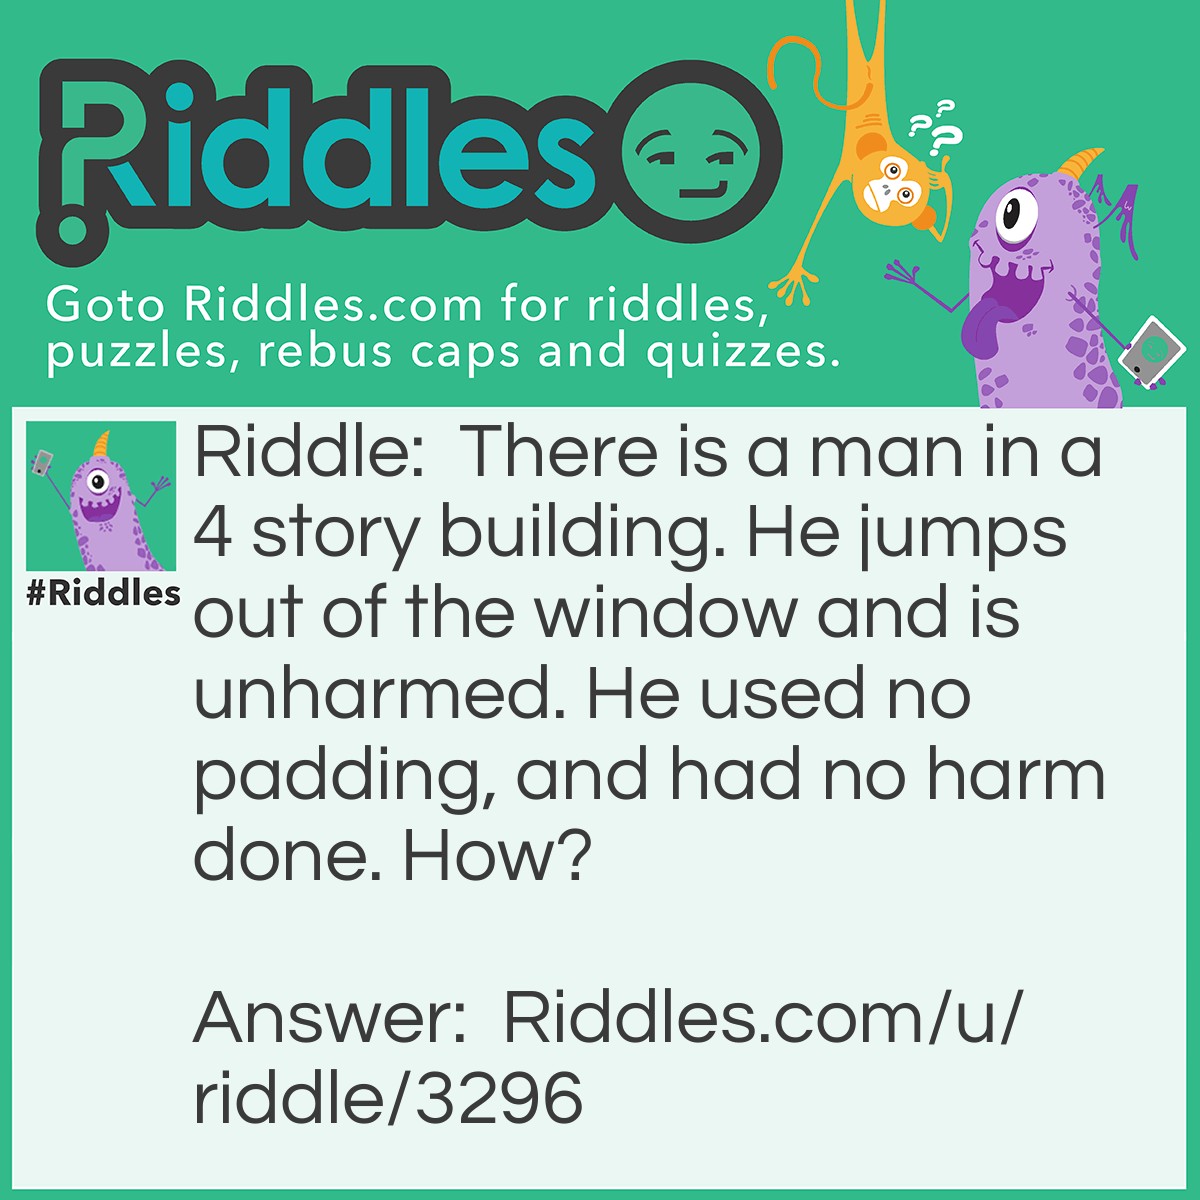 Riddle: There is a man in a 4-story building. He jumps out of the window and is unharmed. He used no padding and had no harm done. How? Answer: He jumped out of the ground floor.